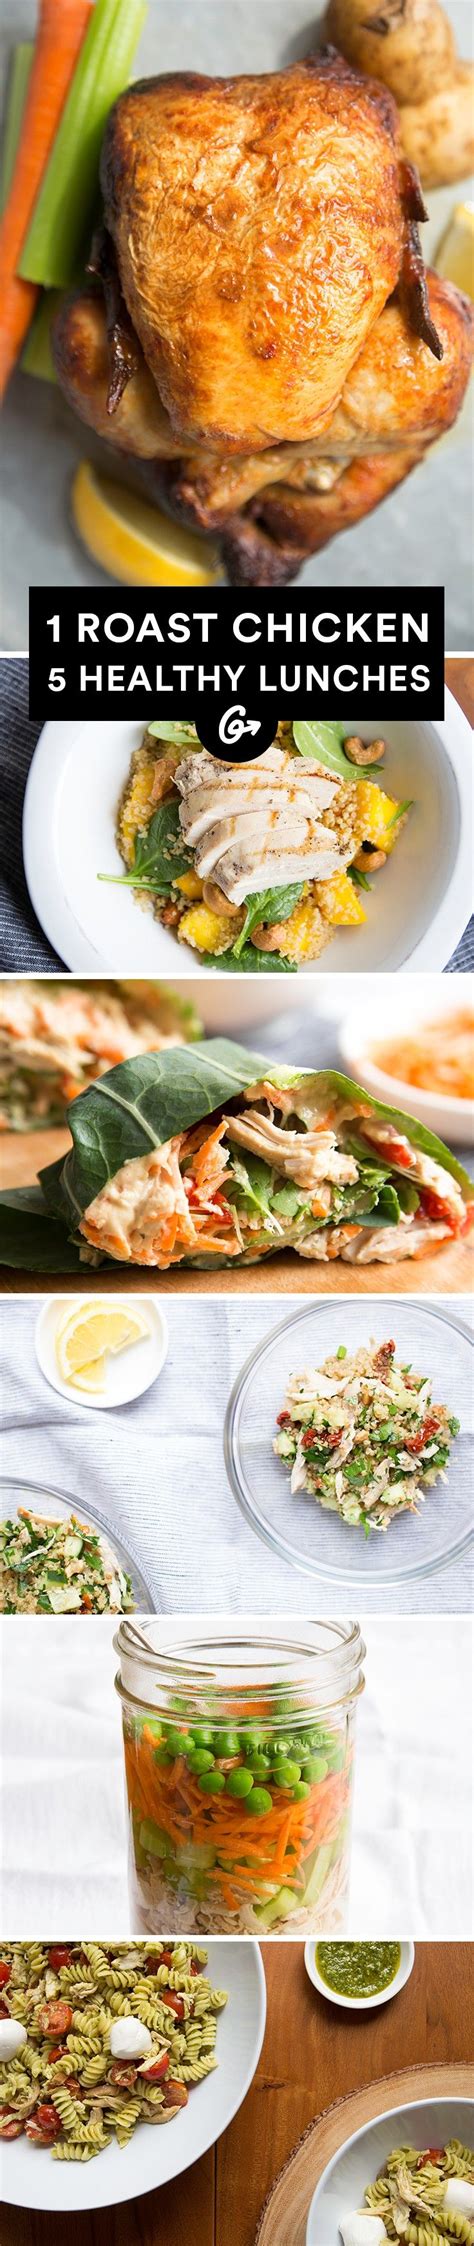 healthy lunches      chicken chicken lunch recipes